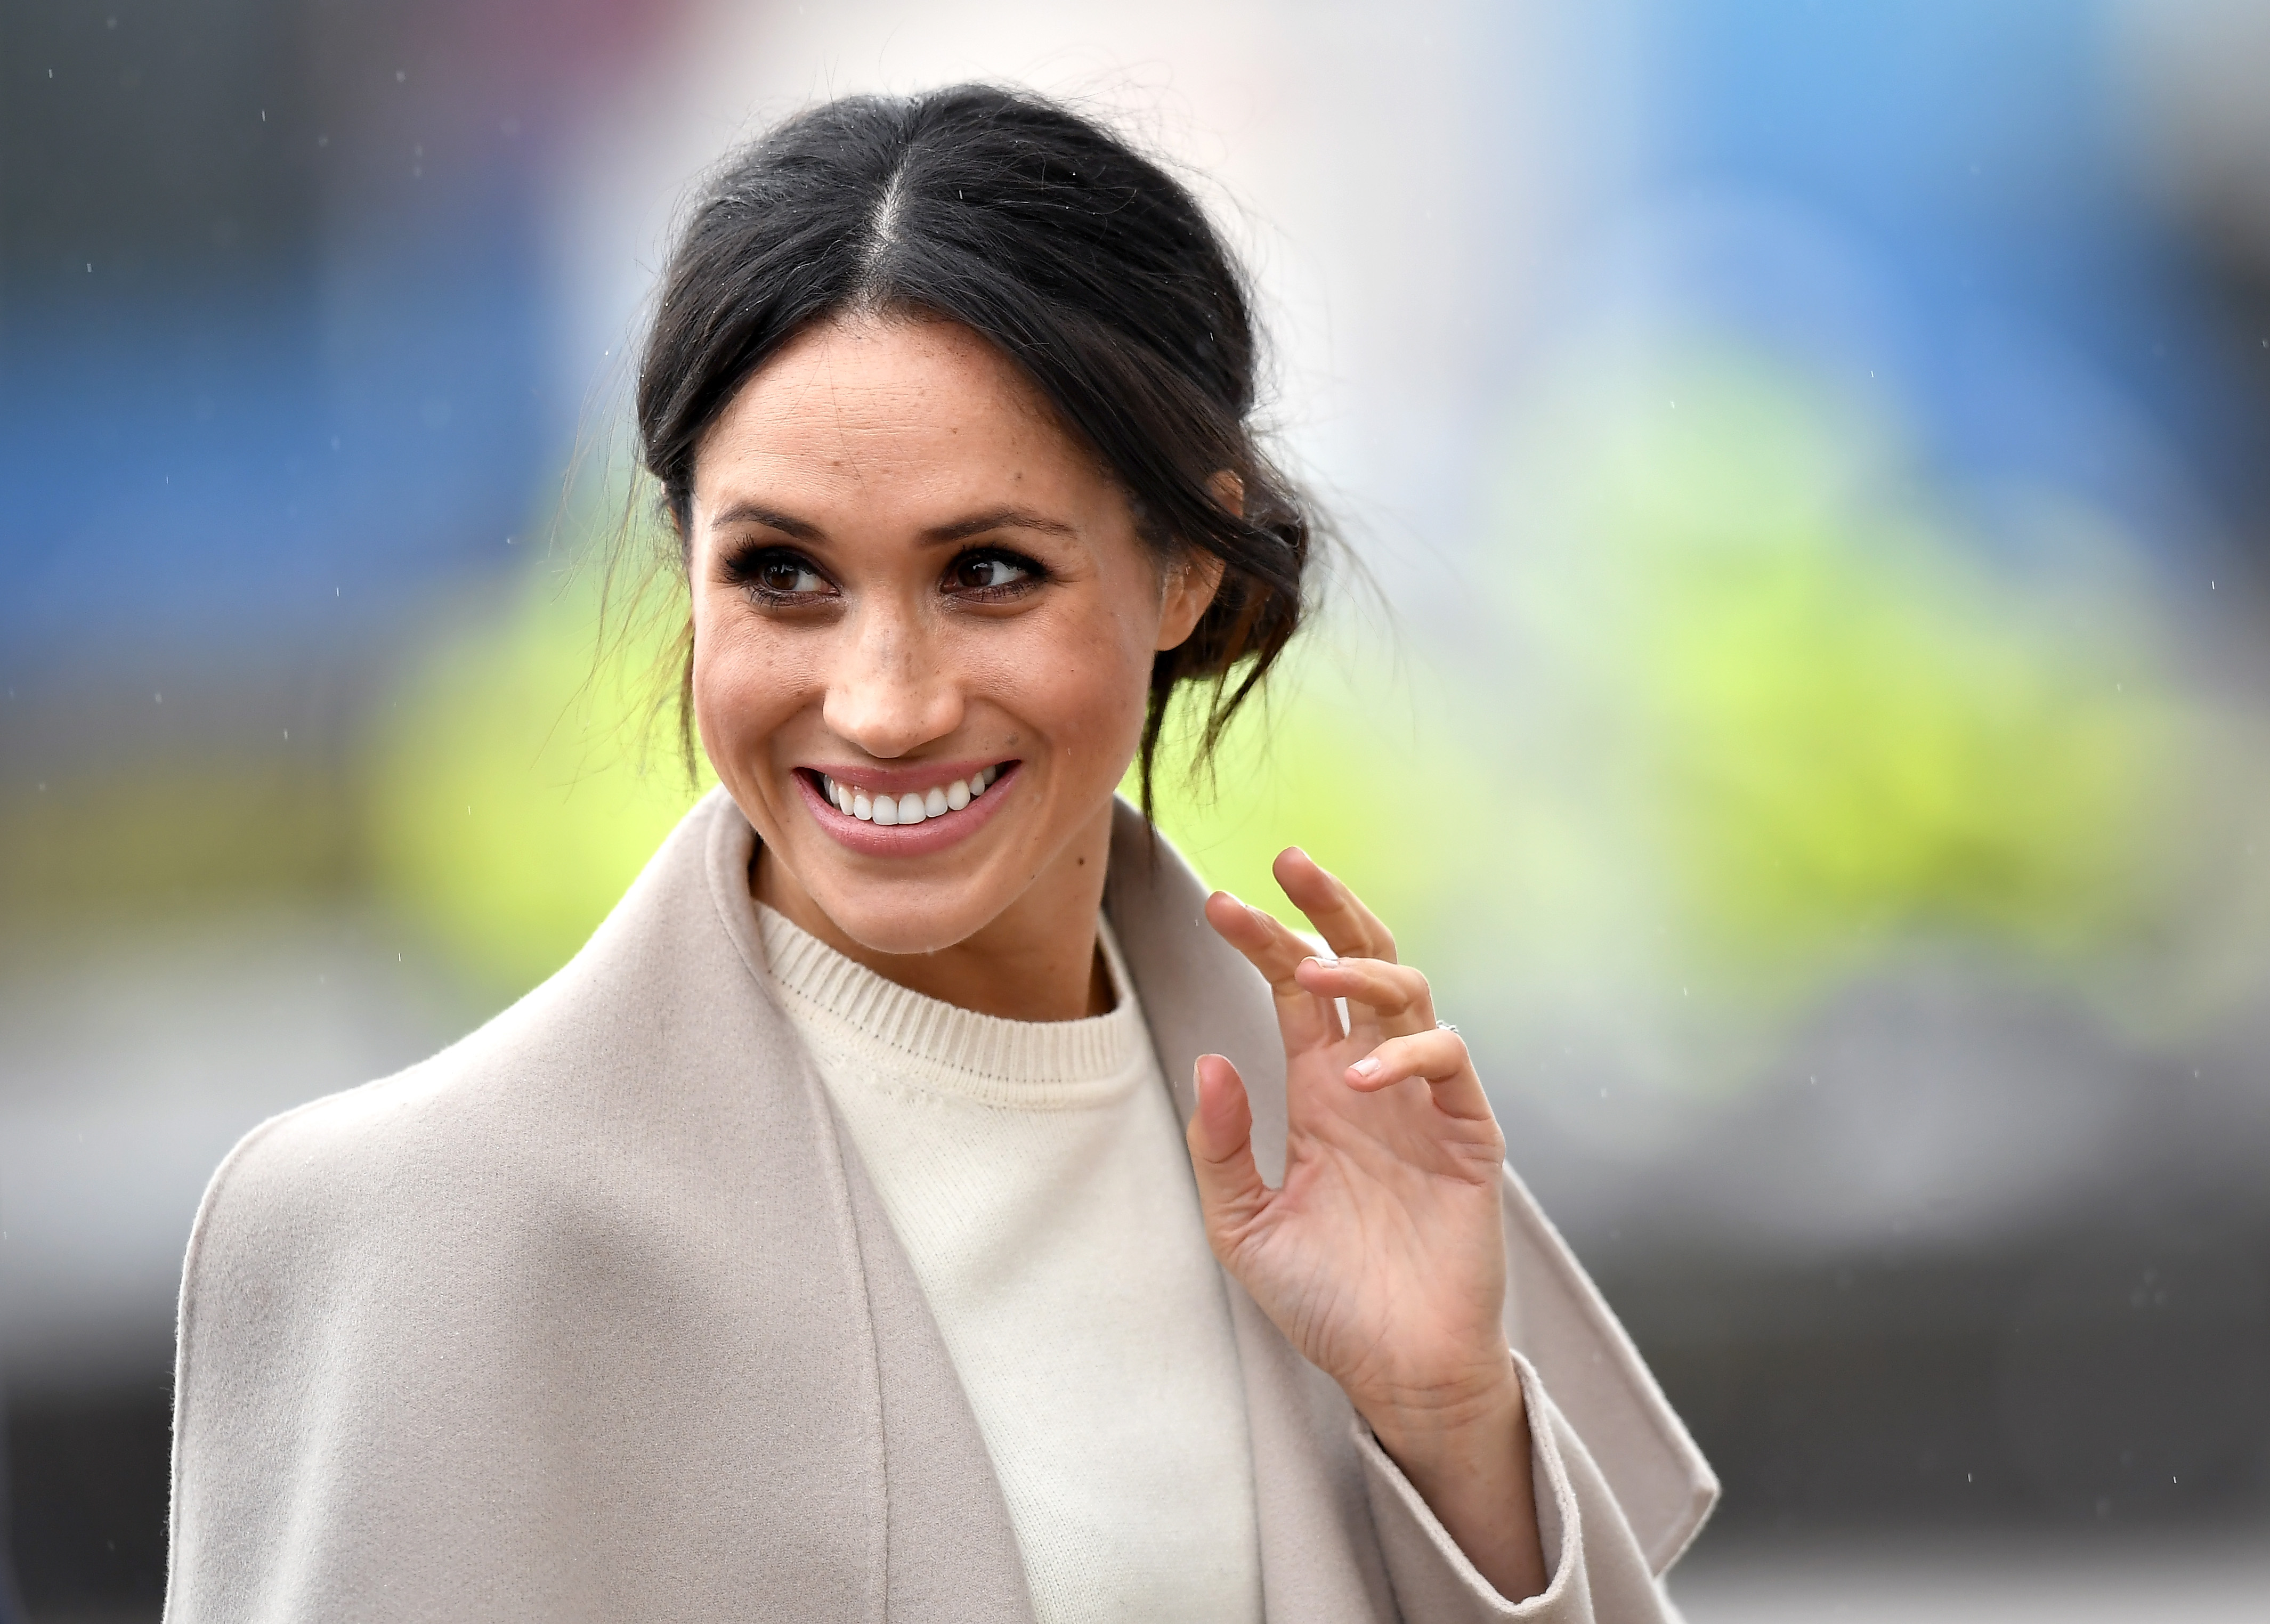 Meghan Markle giving a wave to a crowd in Northern Ireland